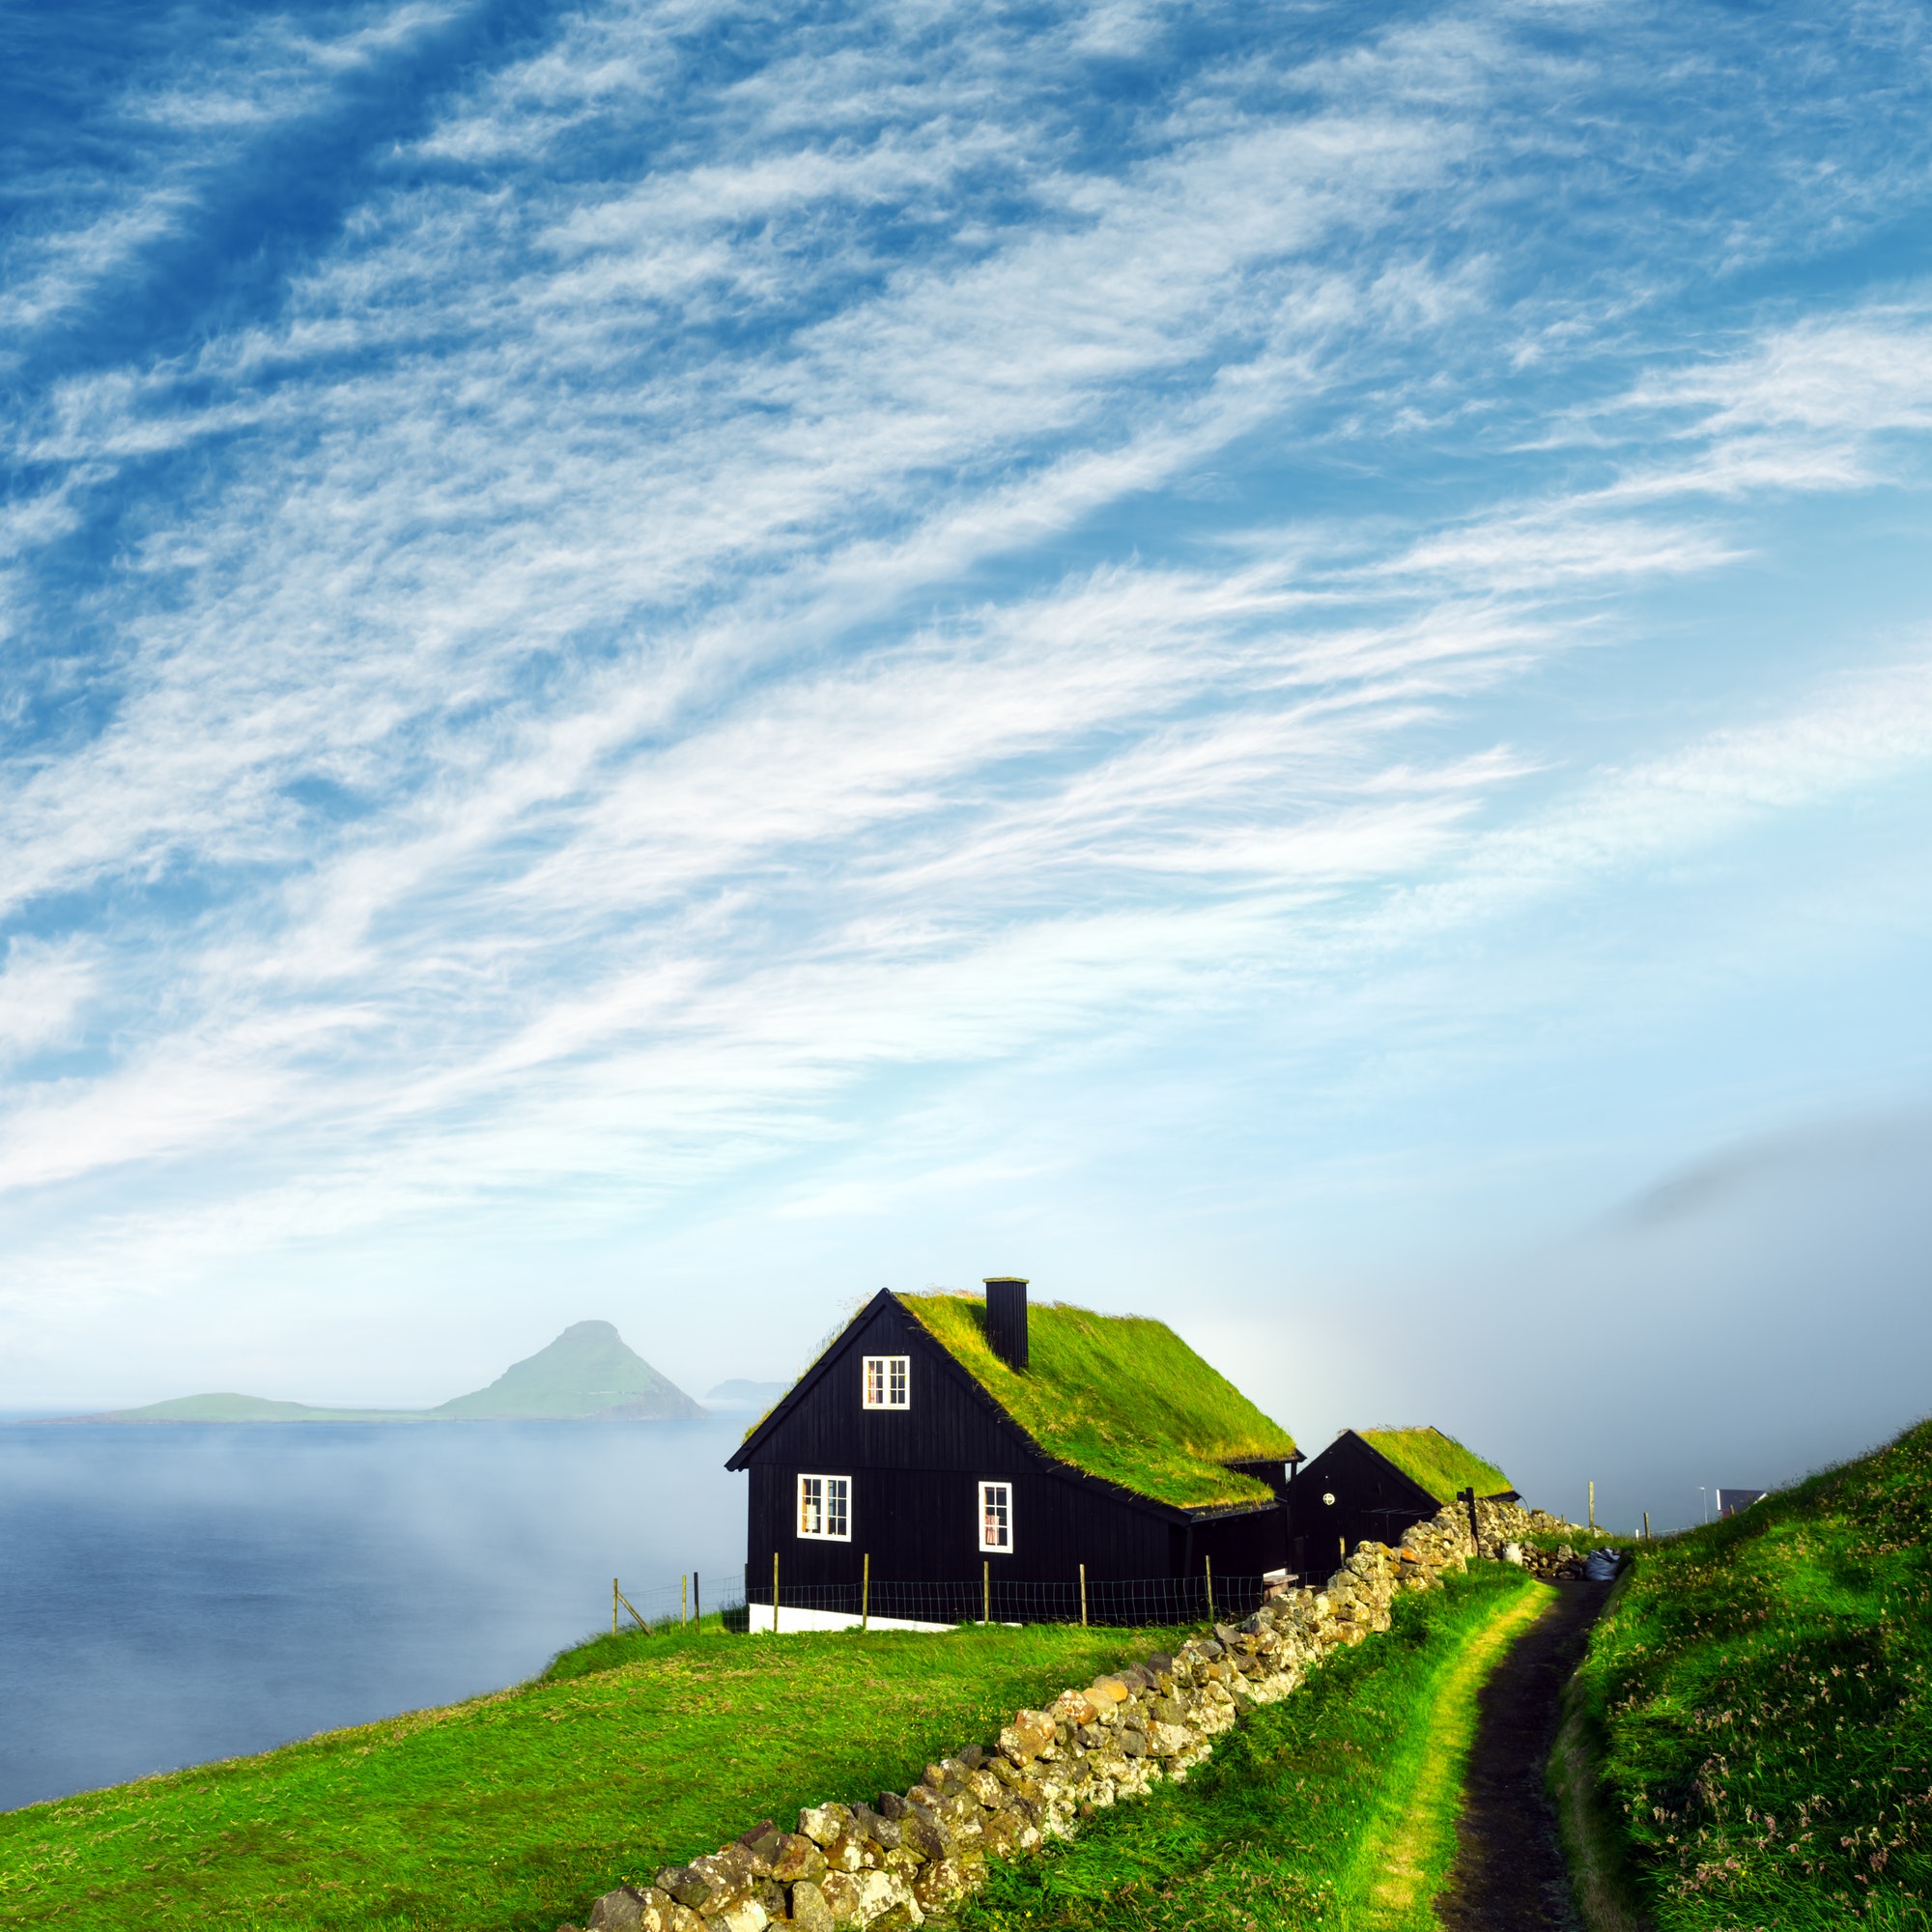 Foggy morning view of a house with typical grass roof